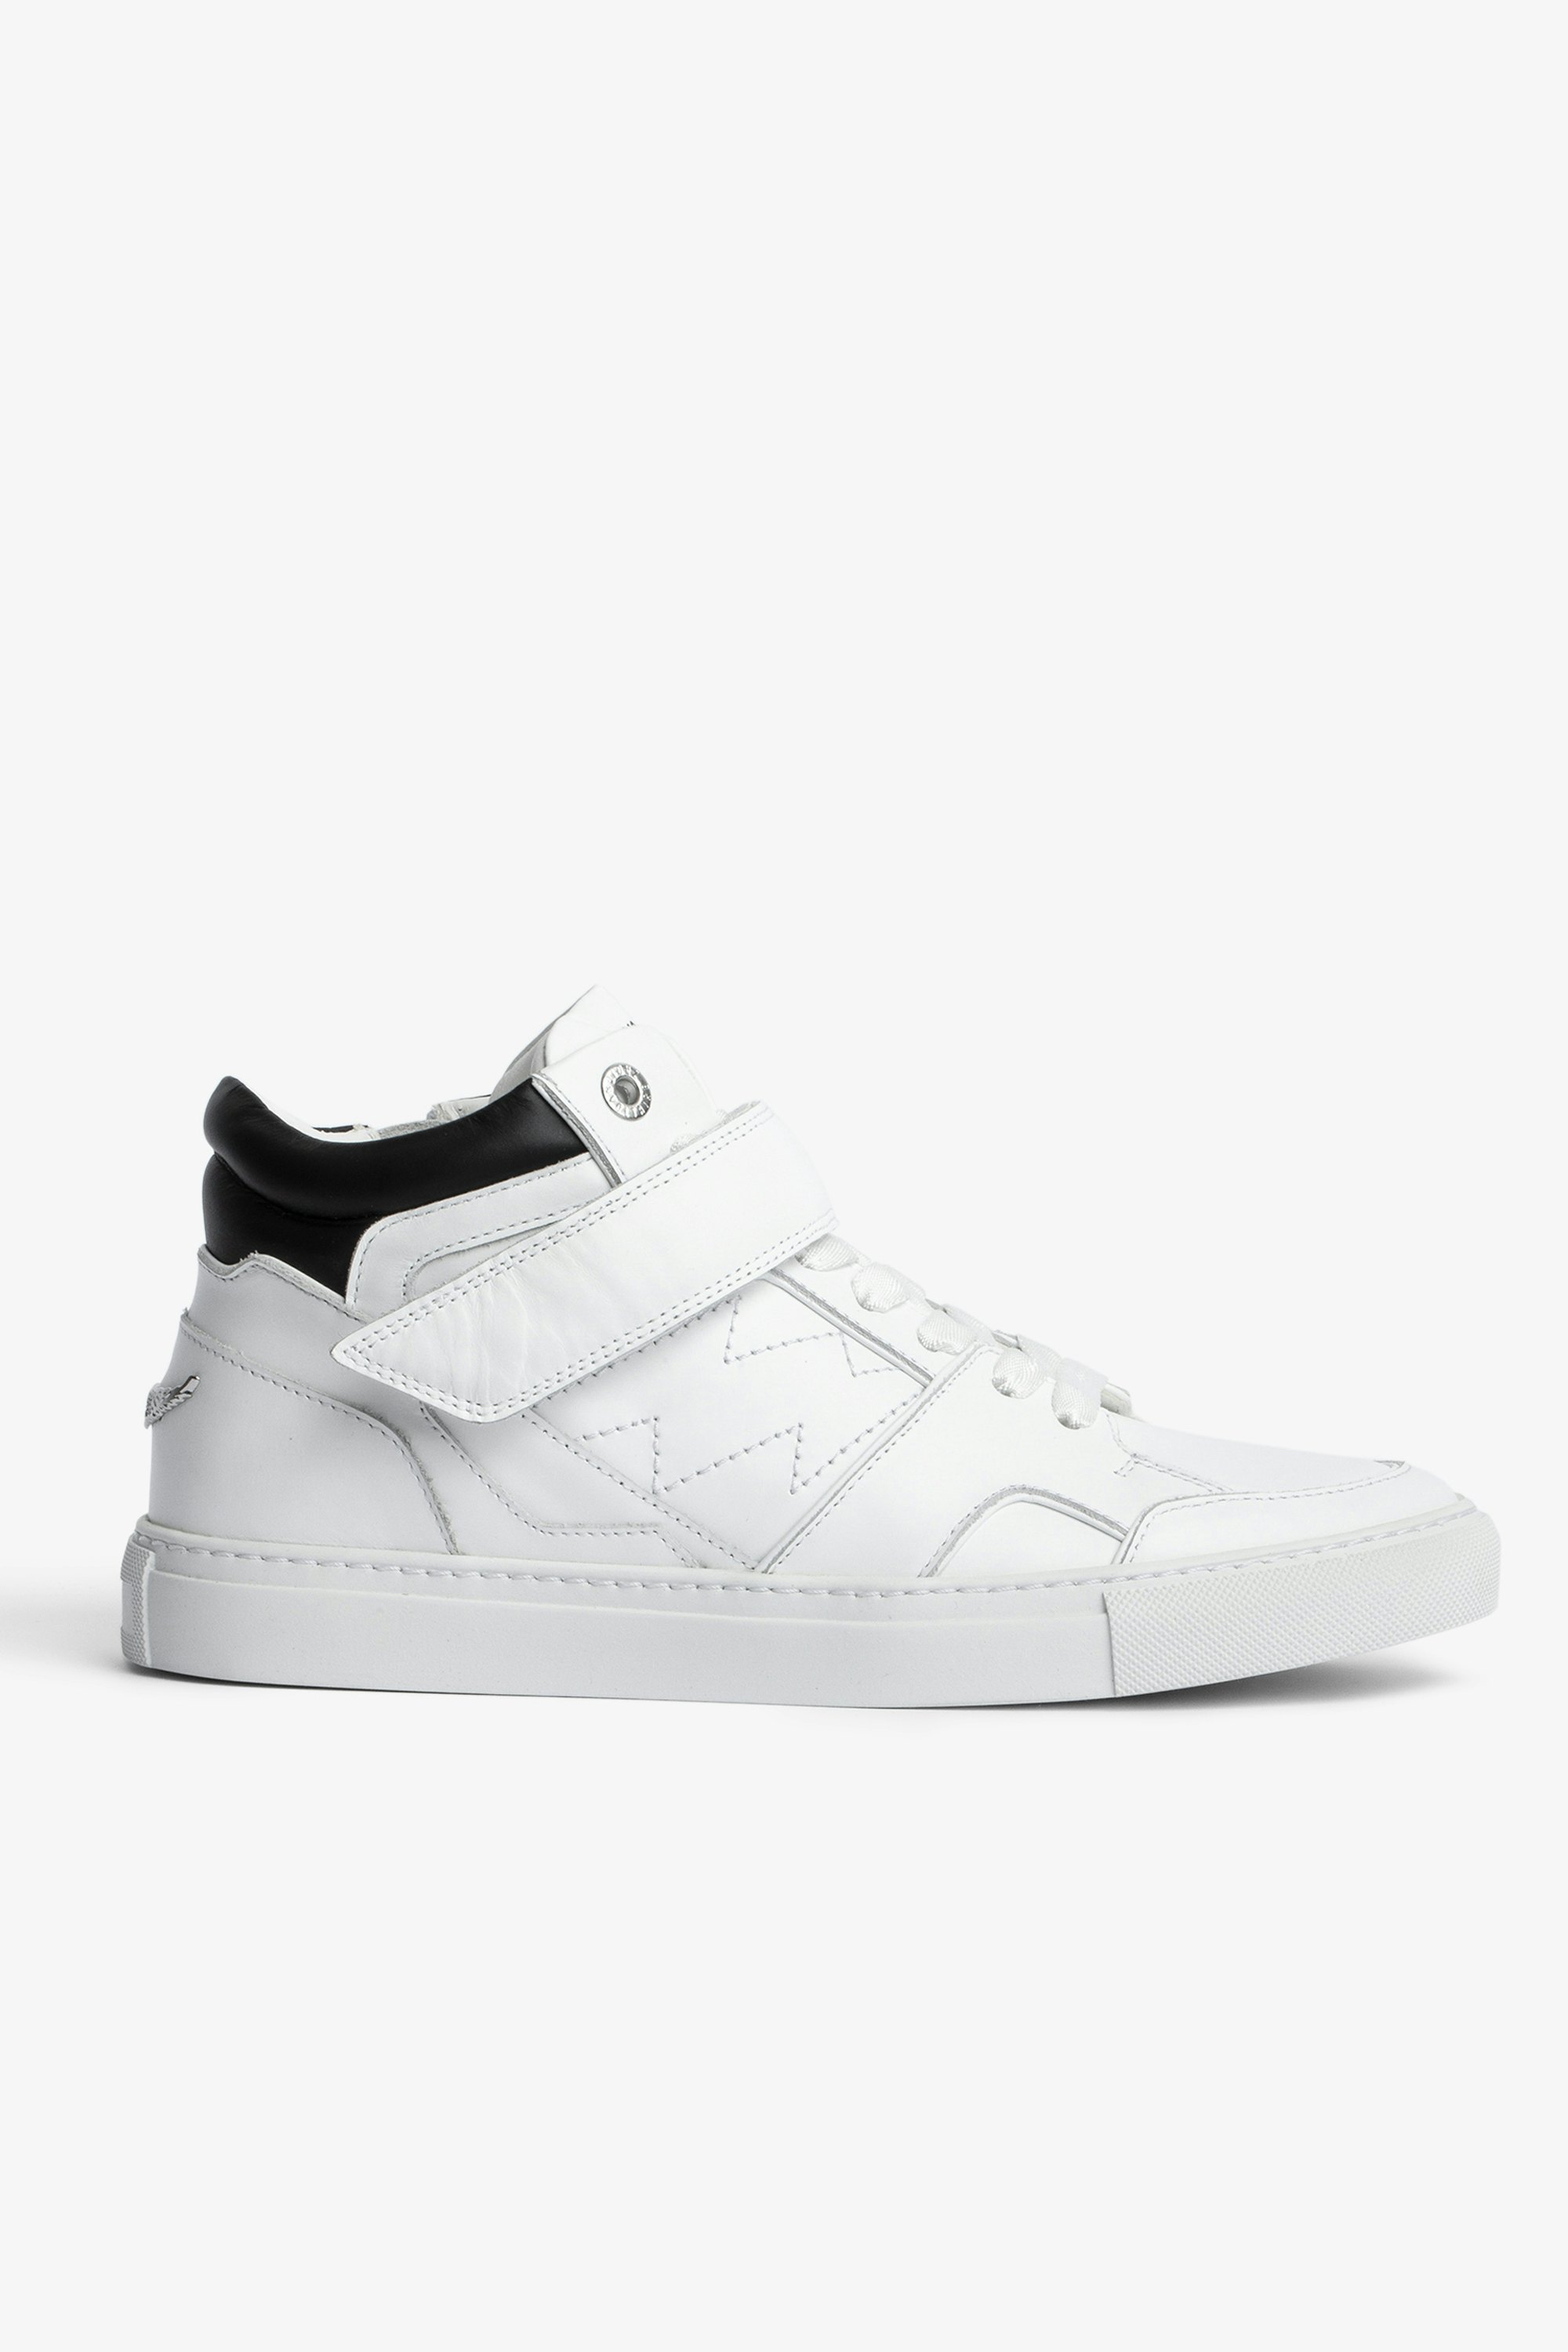 ZV1747 Mid Flash Sneakers - Women’s white leather mid-top sneakers